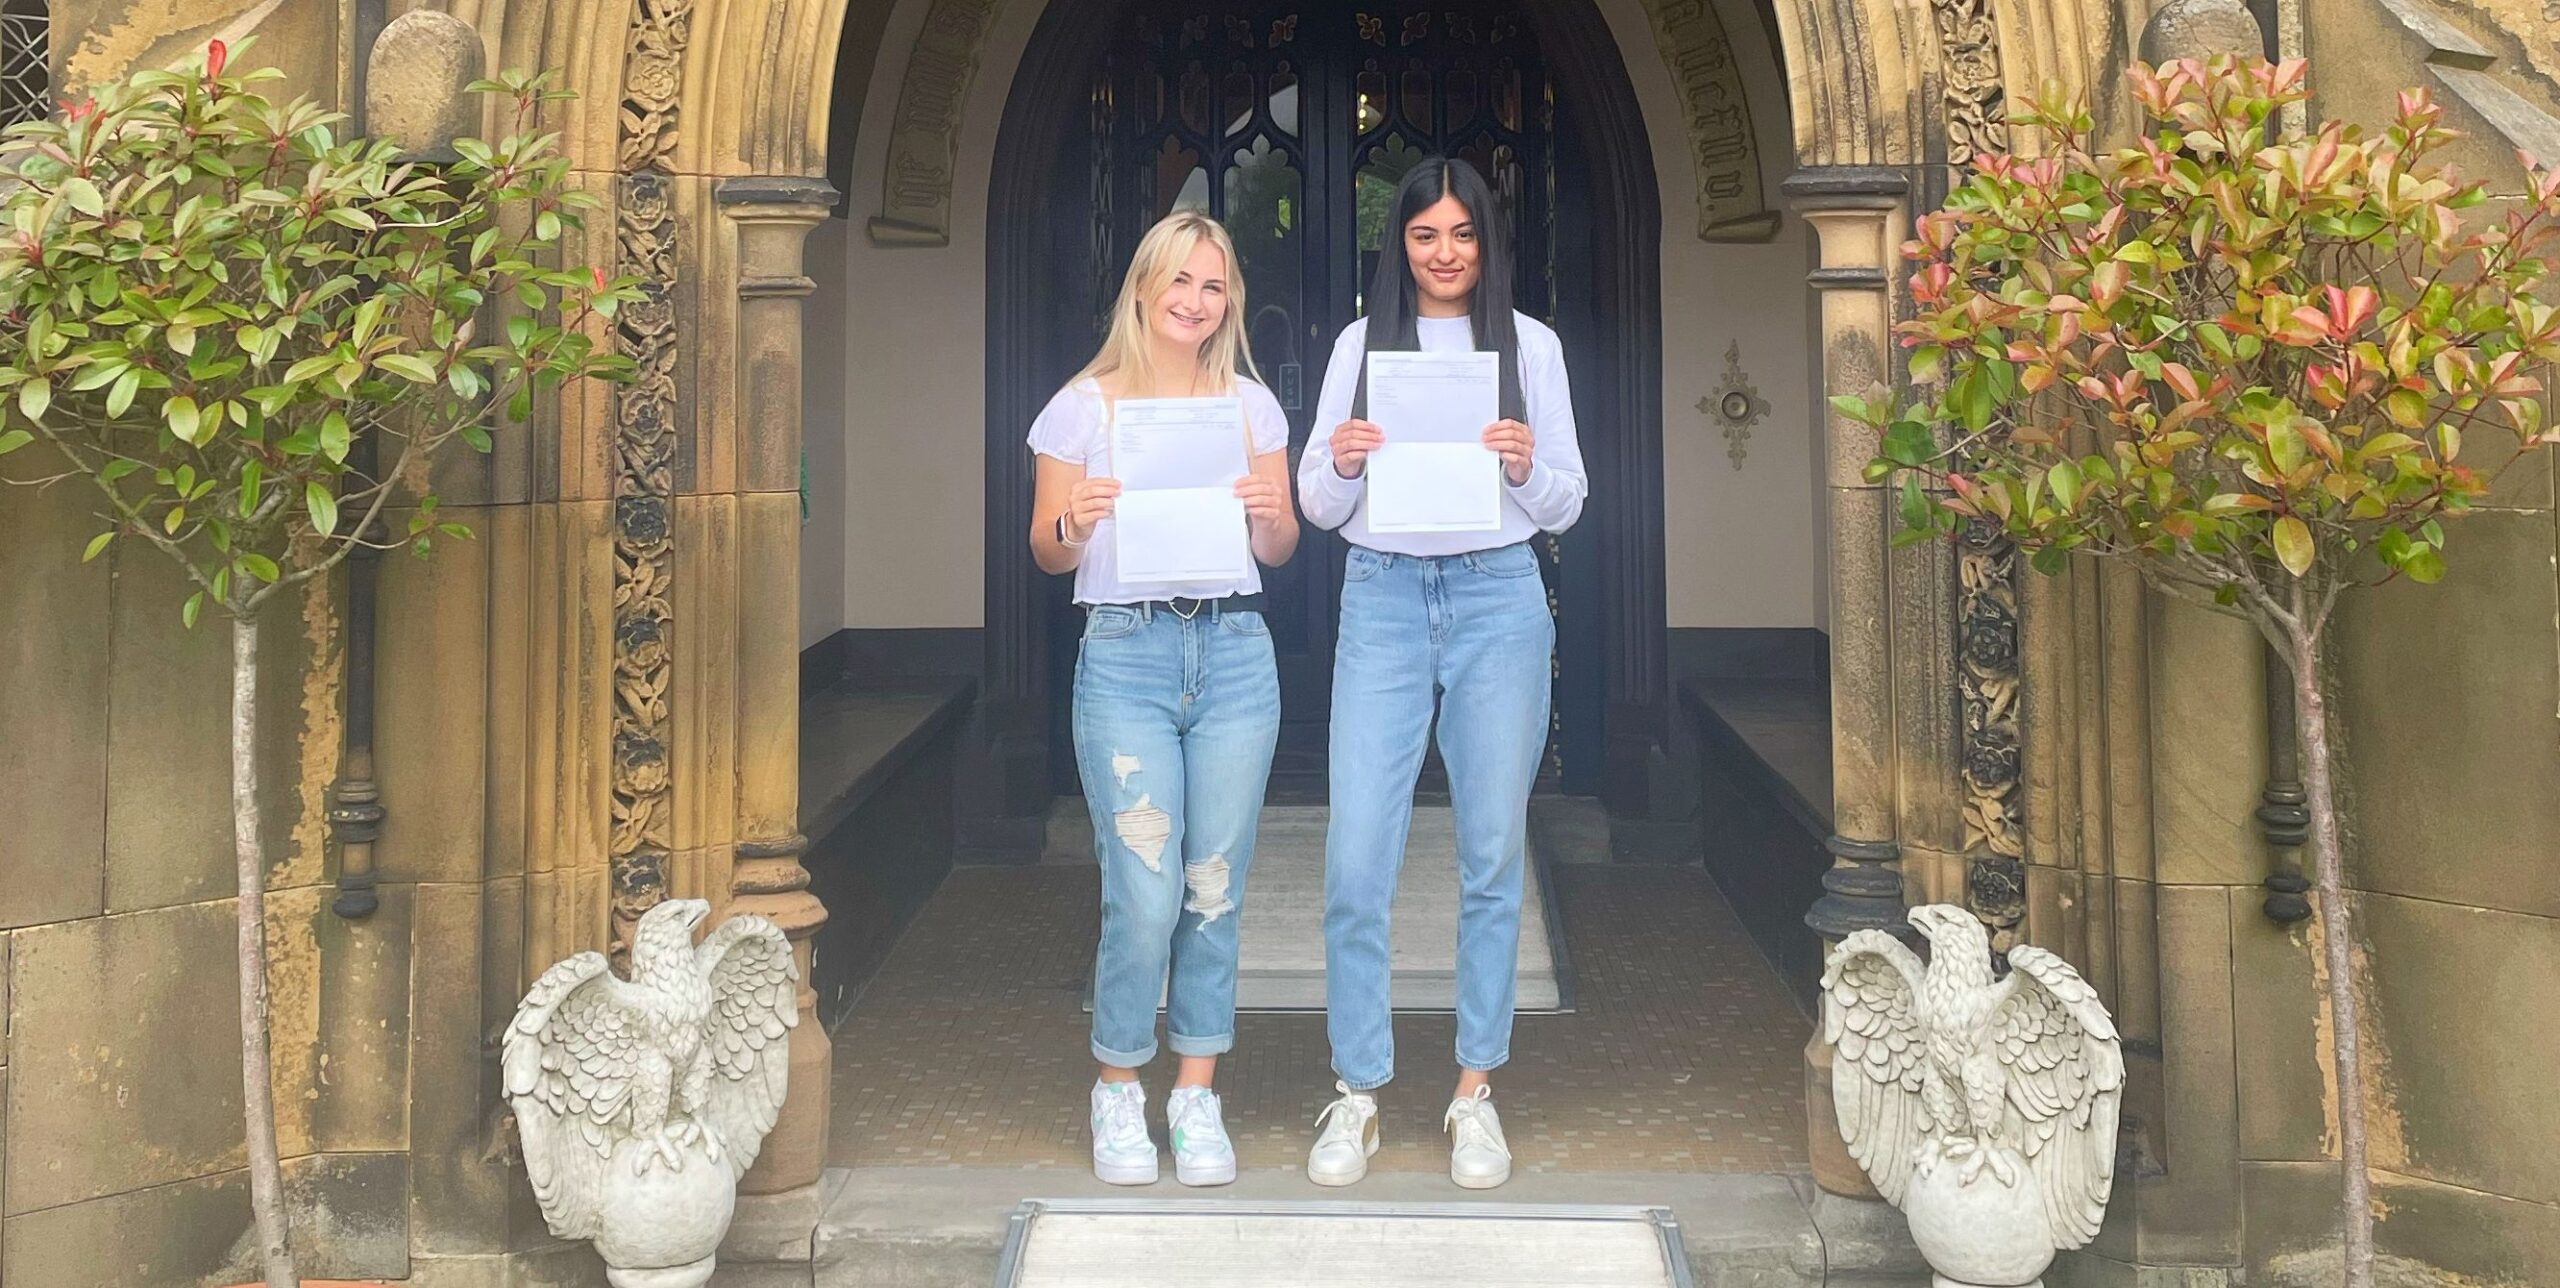 Rebecca Houghton and Diva Anand celebrate their A Levels at Scarisbrick Hall School near Southport